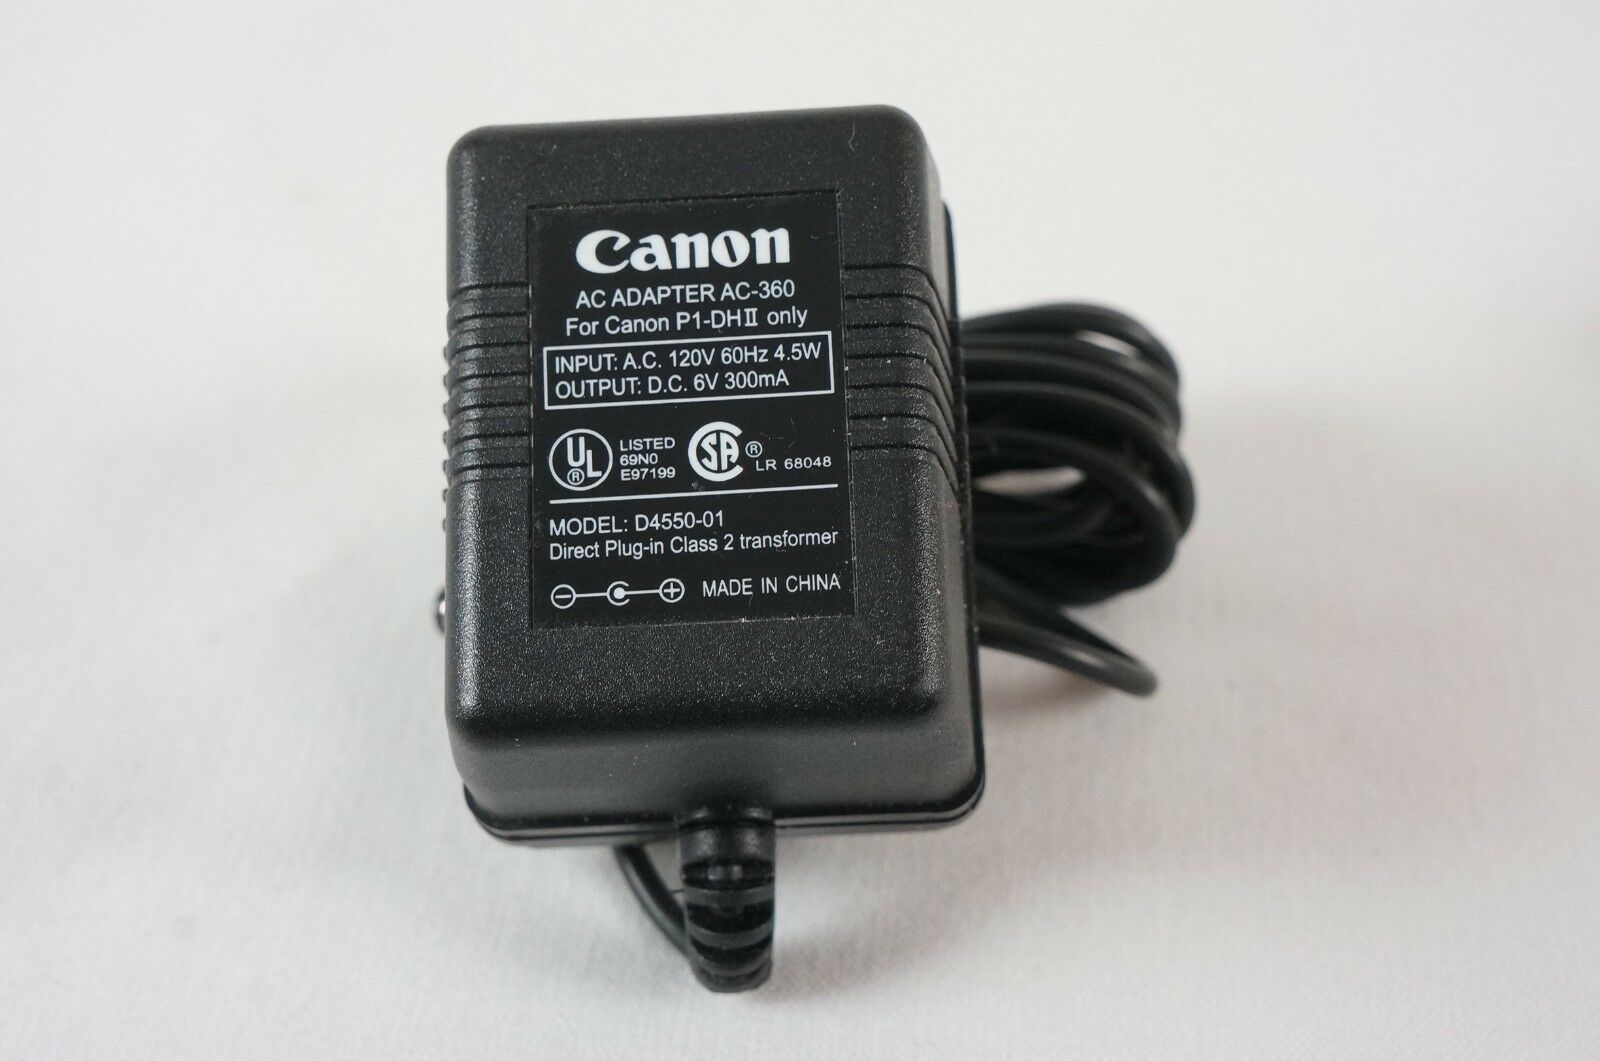 New CANON D4550-01 AC ADAPTER AC-360 For Canon P1-DHII DC 6V 300mA